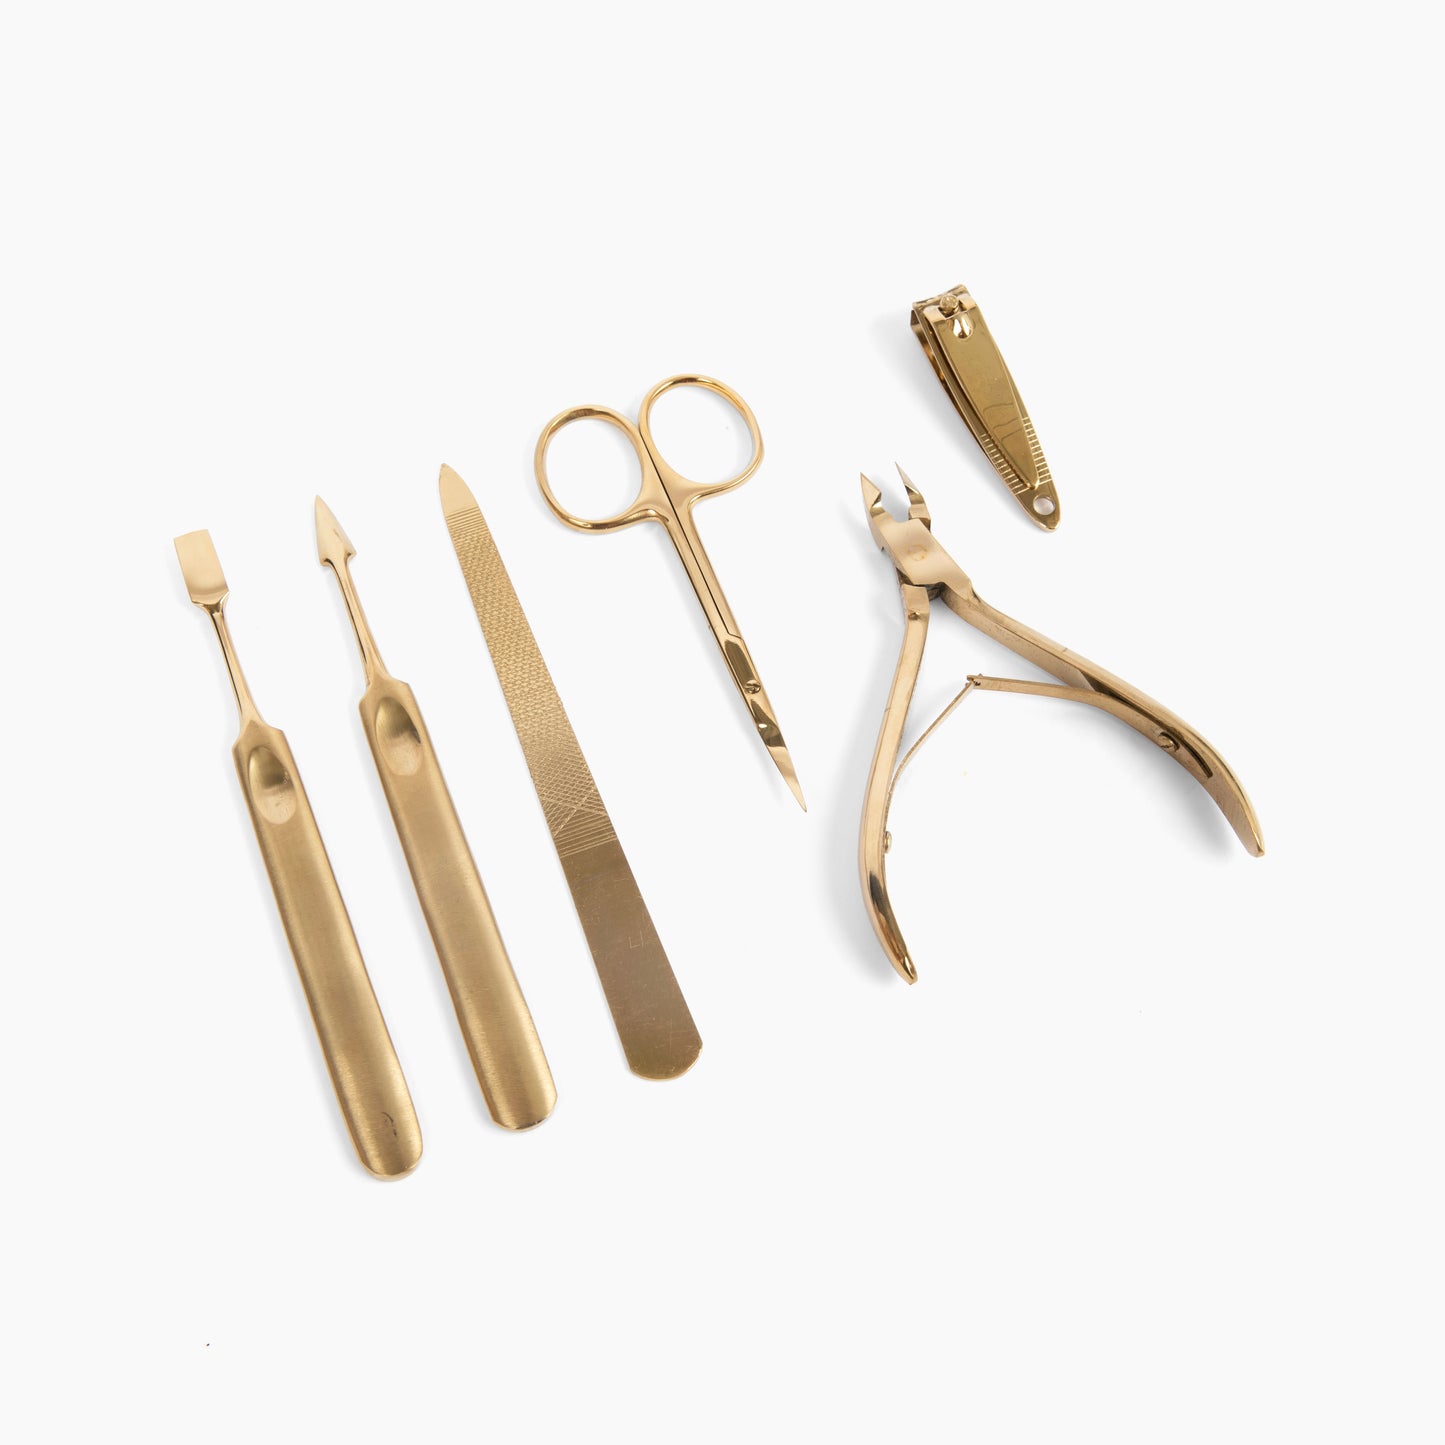 manicure tools. on a white background, a six piece gold manicure set is laid out.